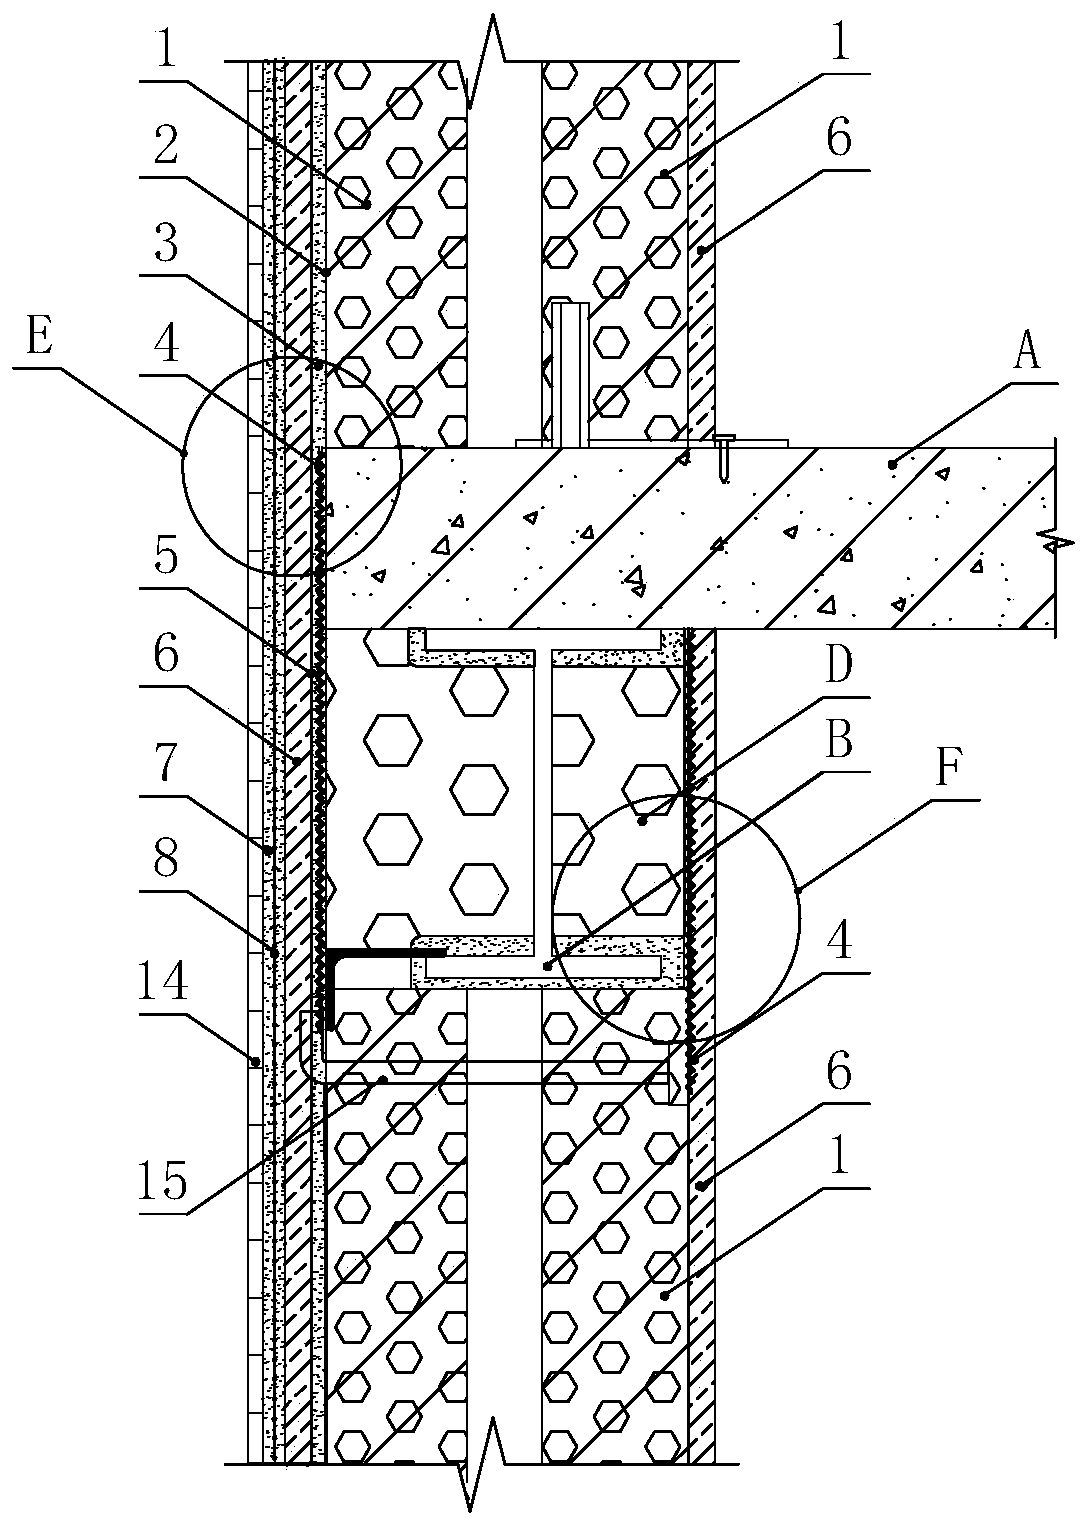 Embedded type light wallboard steel structure building structure and construction method